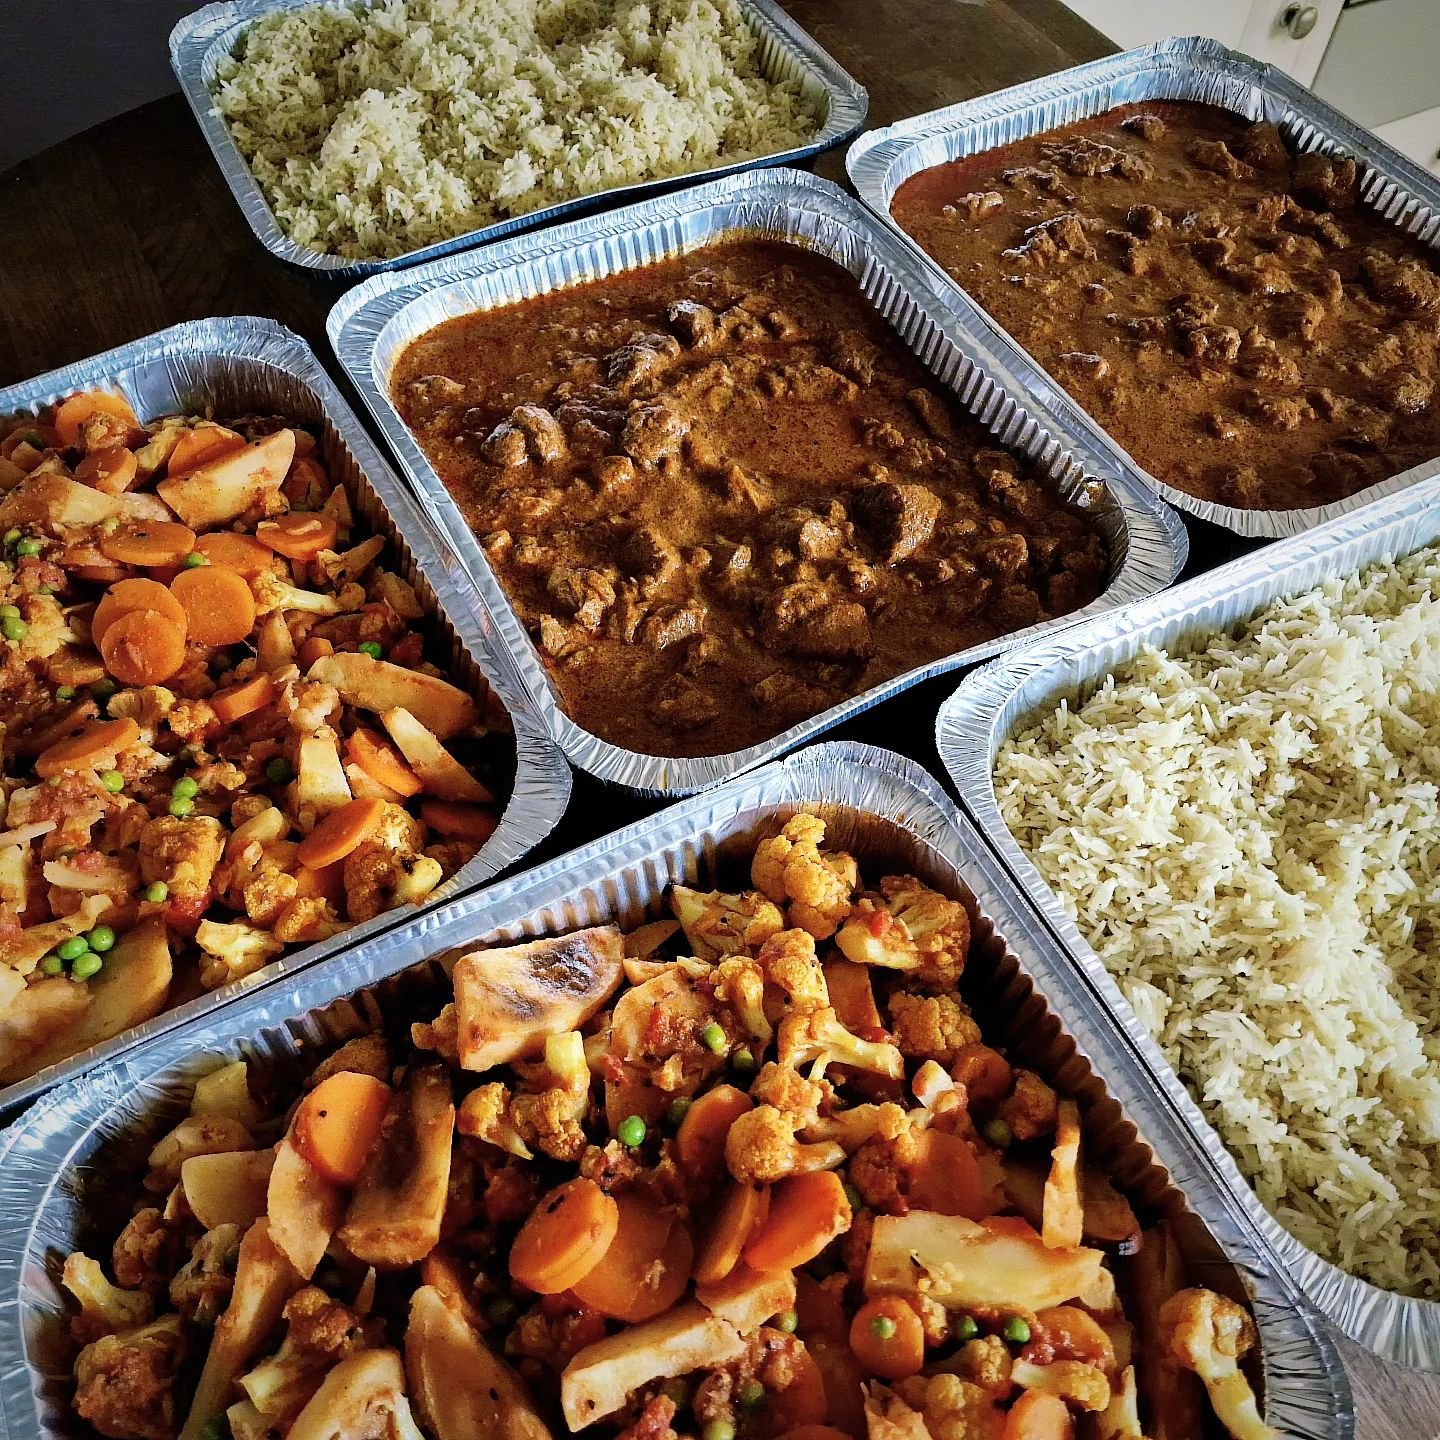 private catering/event catering

we can prepare your bespoke menu - and have it cooled and ready for collection so you can heat/finish at home with full instructions

a much more relaxed way to feed your family &amp; friends without the need to hire 